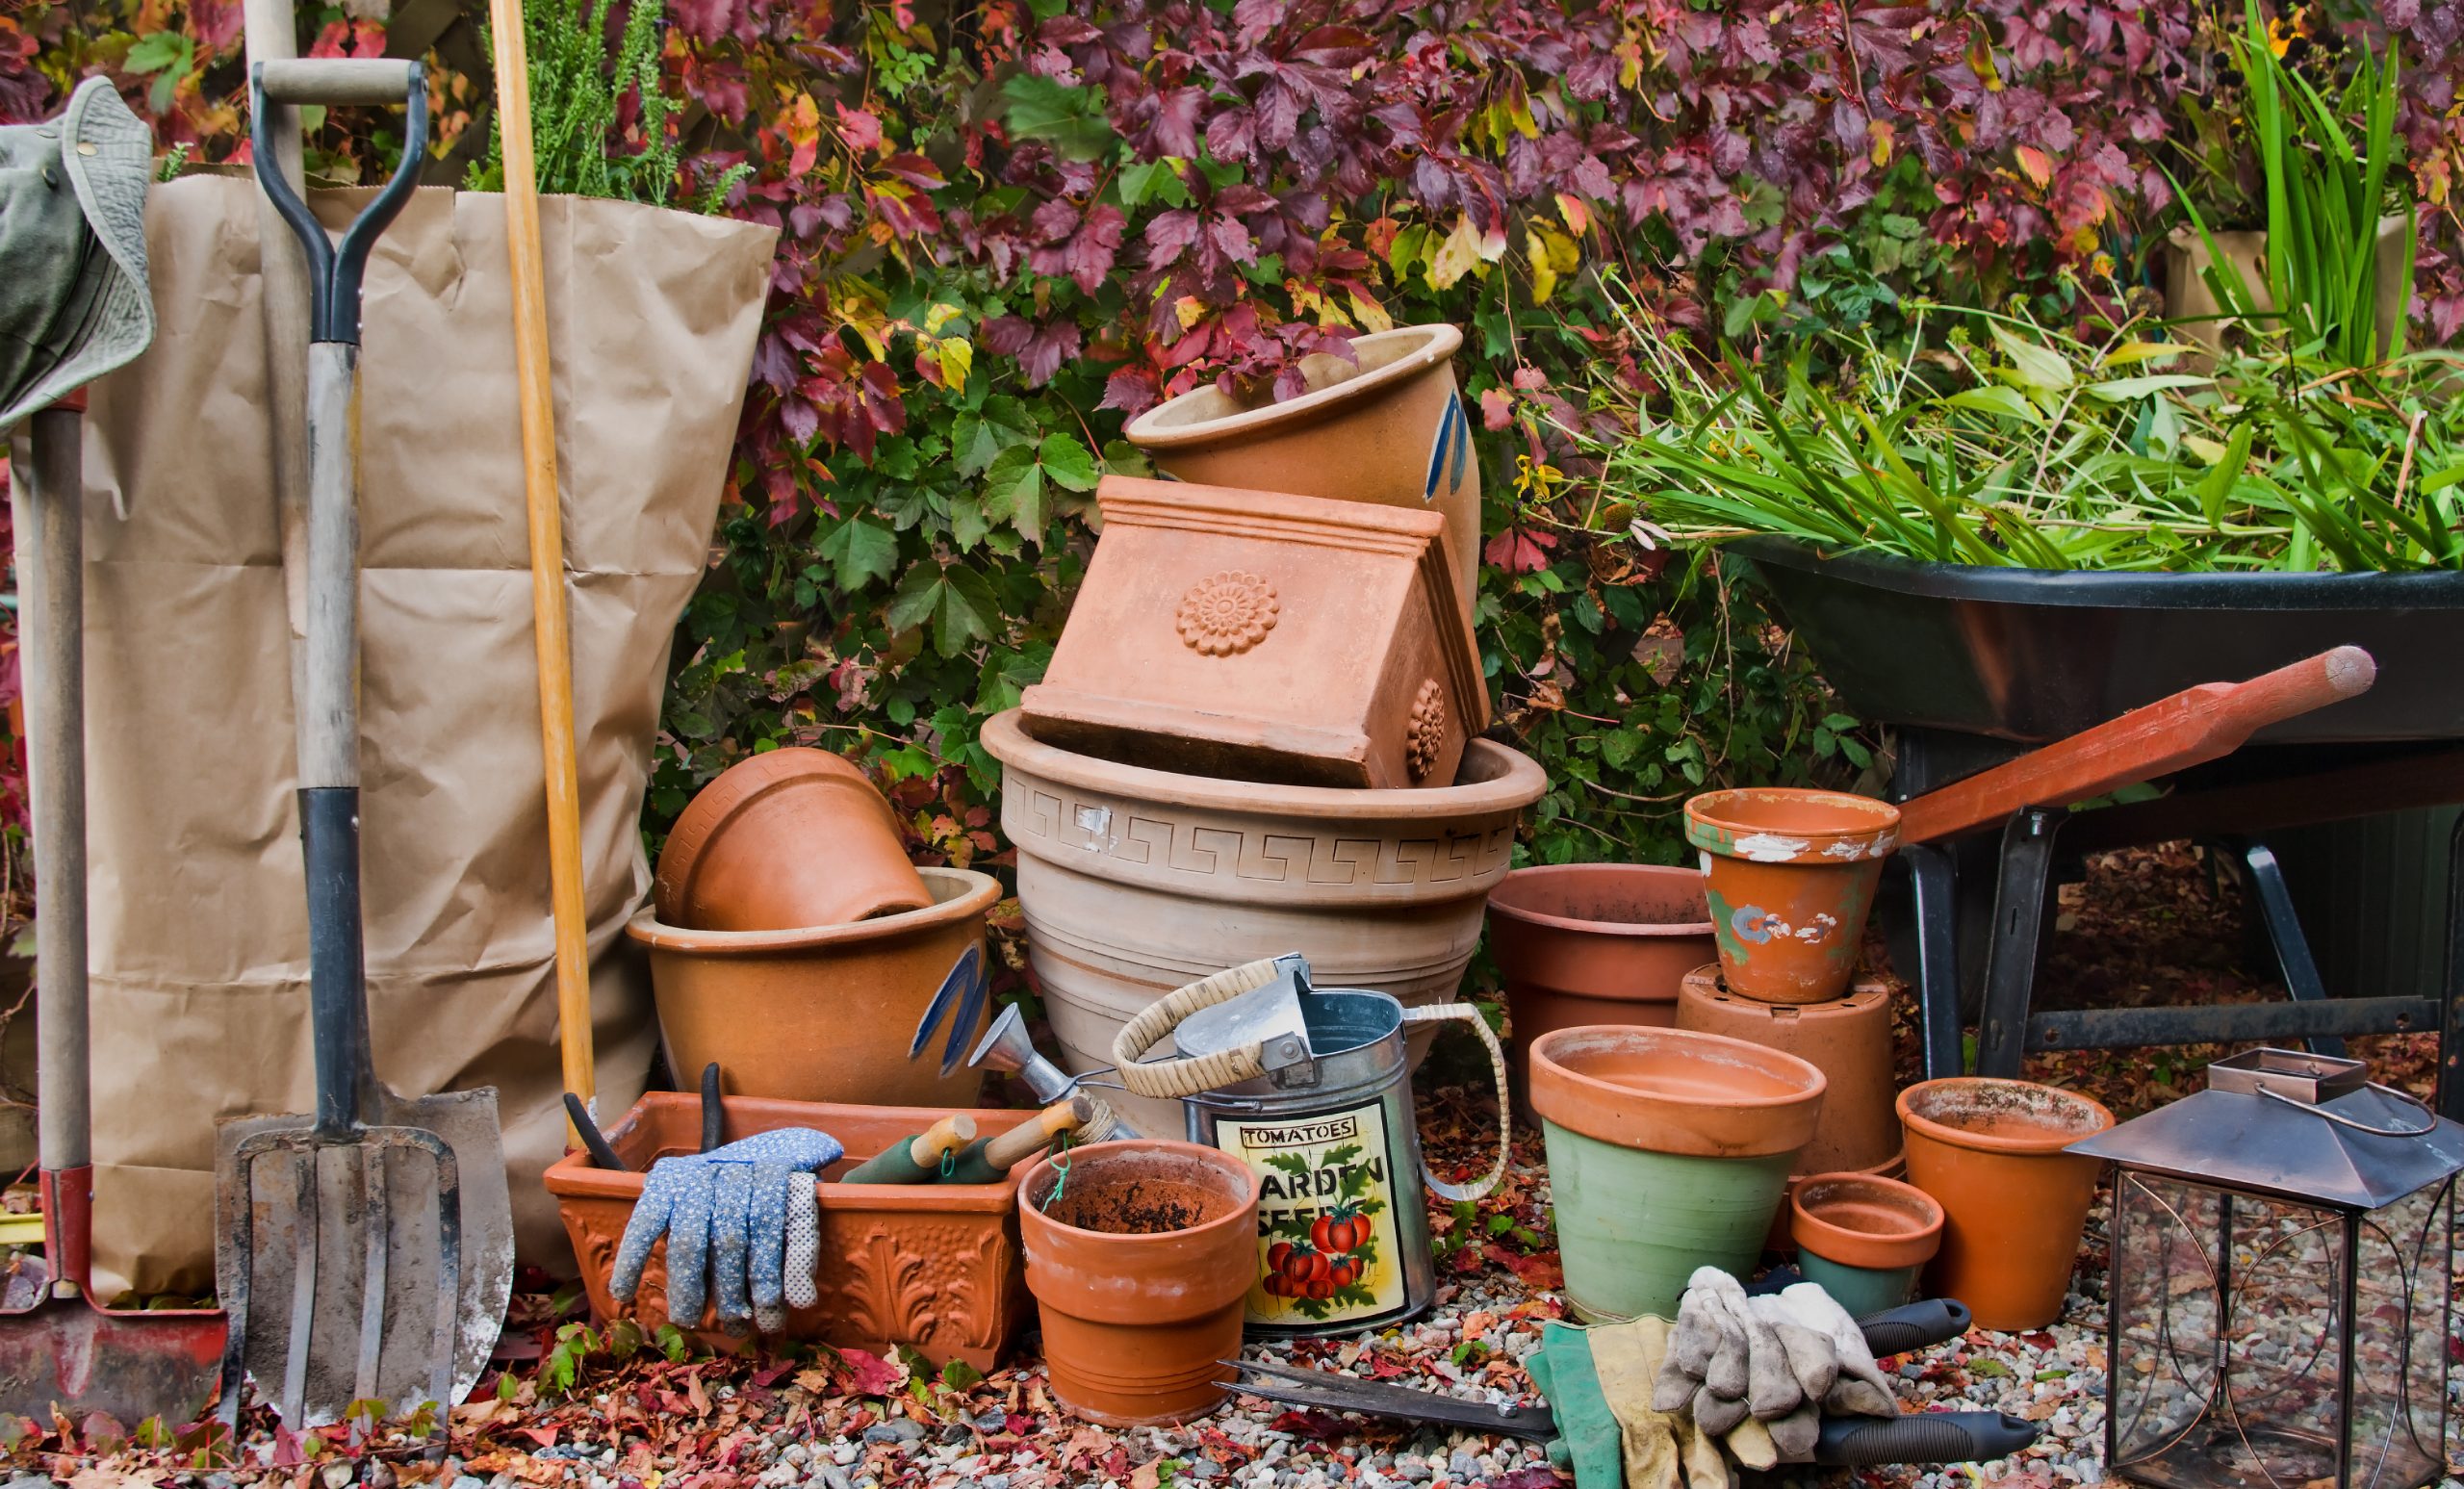 How to Get Your Garden Ready for Autumn